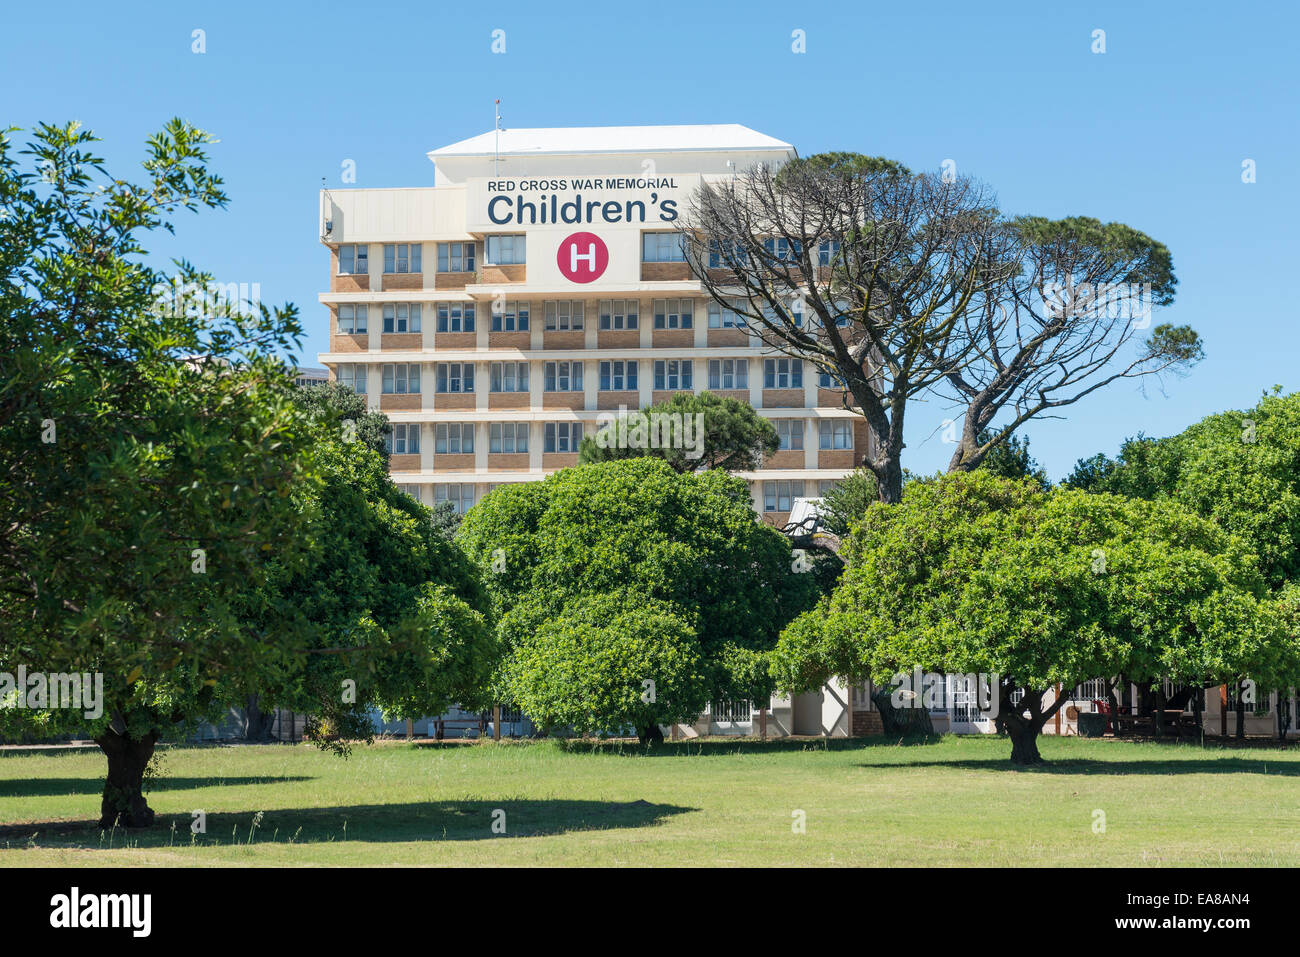 Red Cross War Memorial Children's Hospital is South Africa's only dedicated child health institution, Cape Town, South Africa Stock Photo